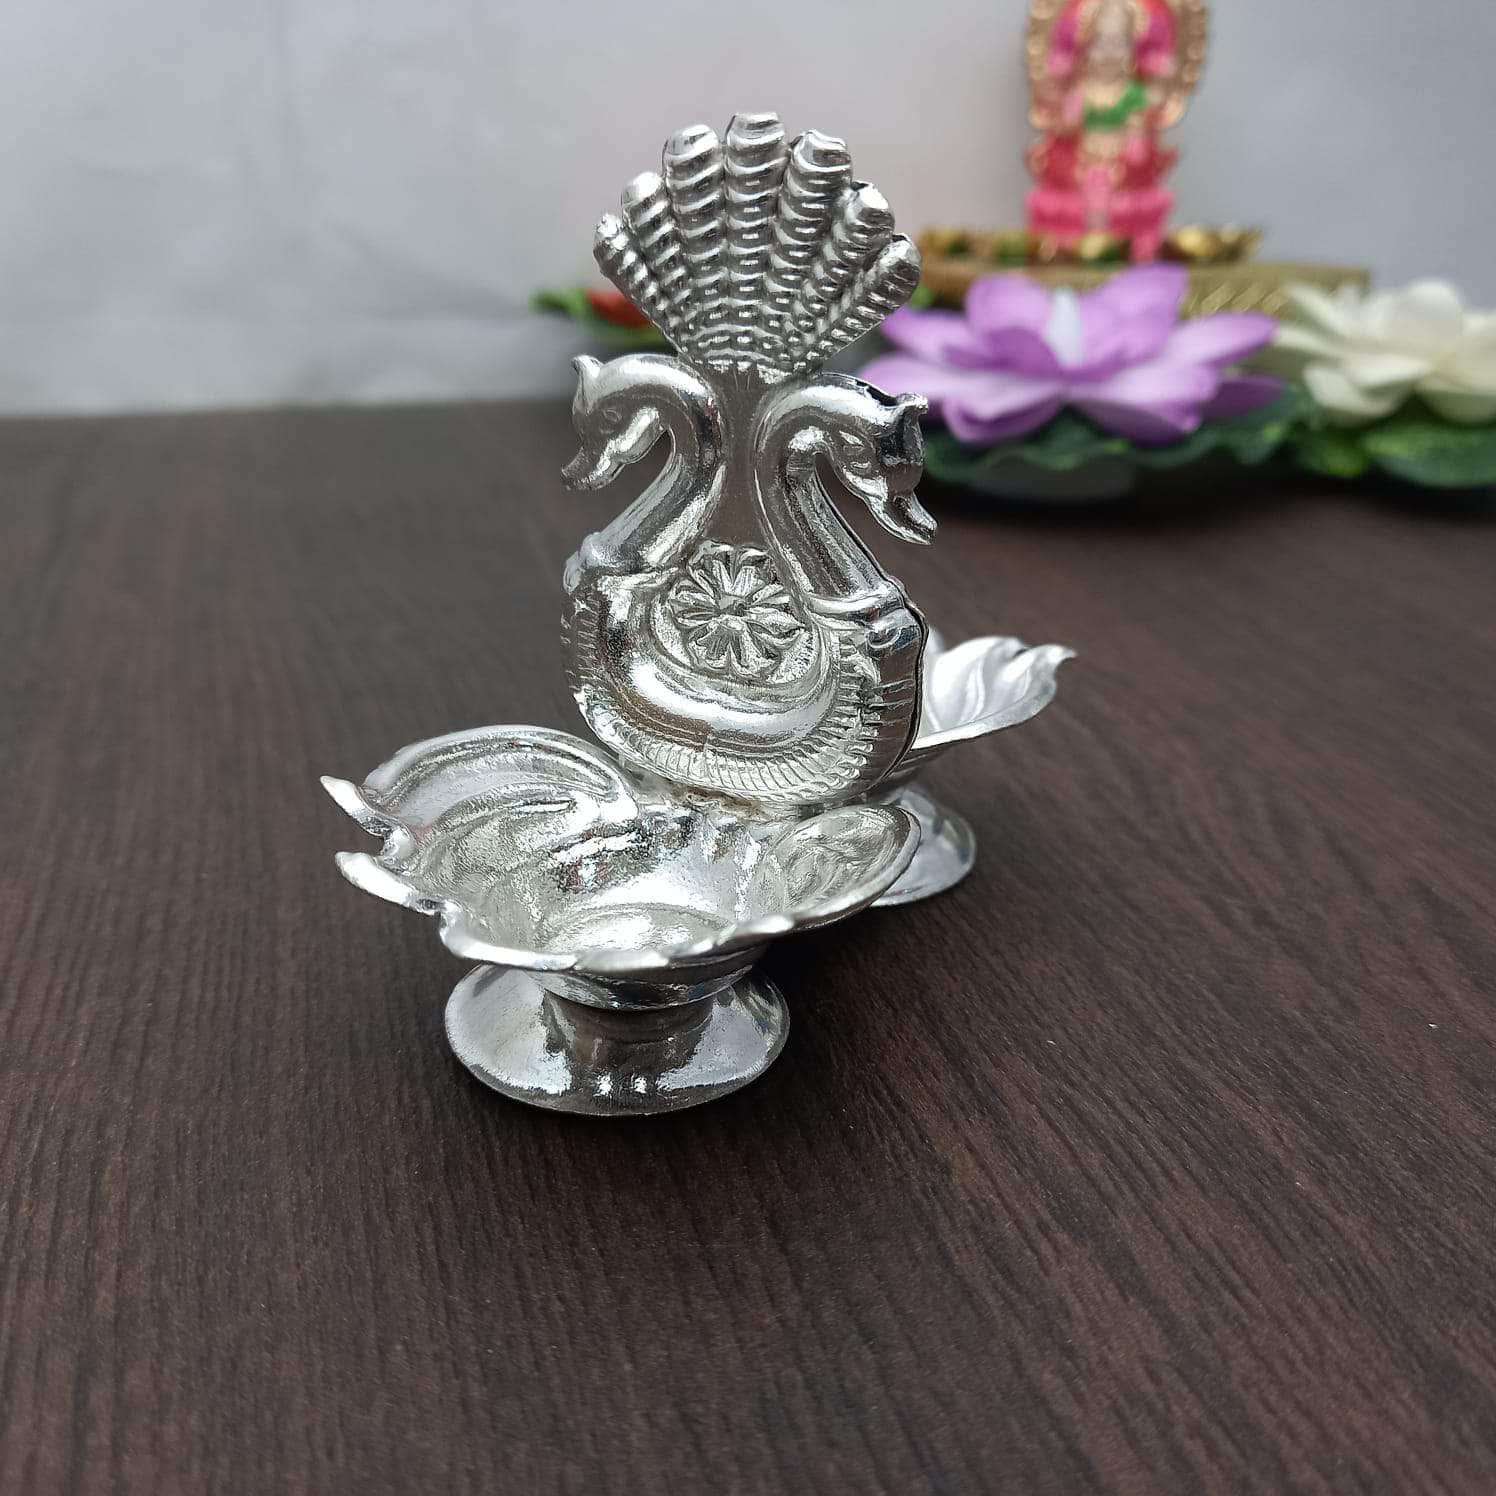 Silver Haldi Kumkum and Rice Plate for Pooja - 1-1-S384 in 49.000 Grams